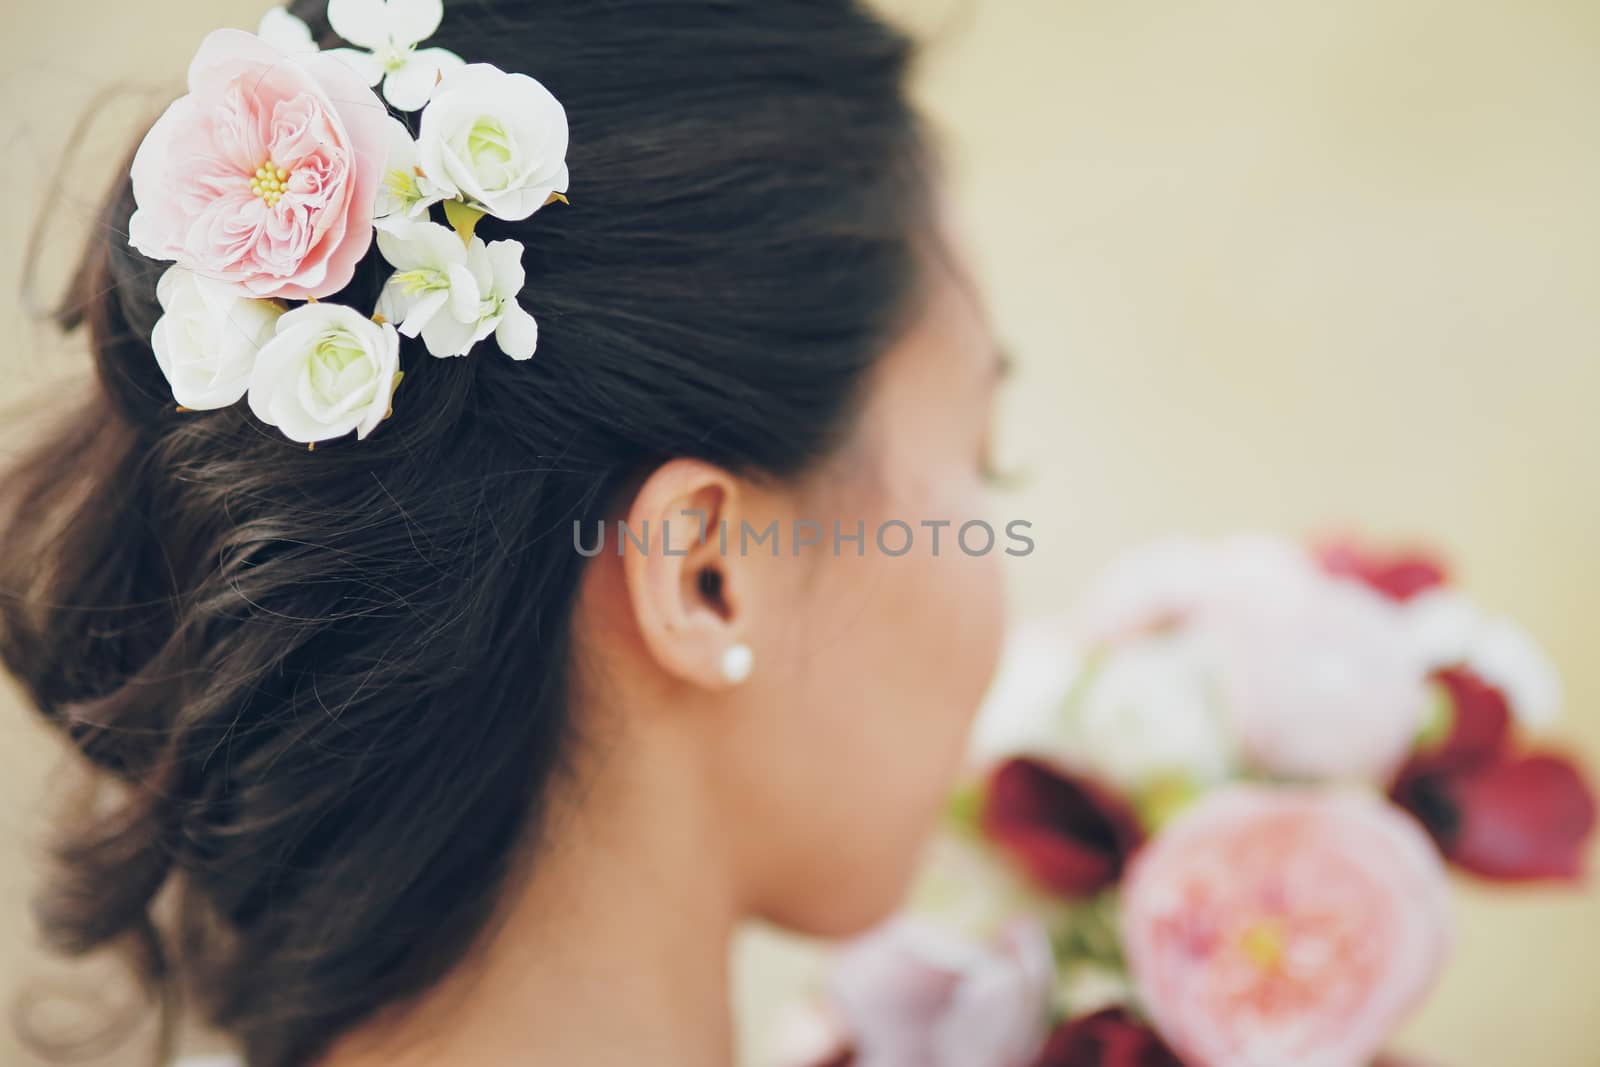 The girl's hair. Flowers in hair. Wedding bouquet. by selinsmo